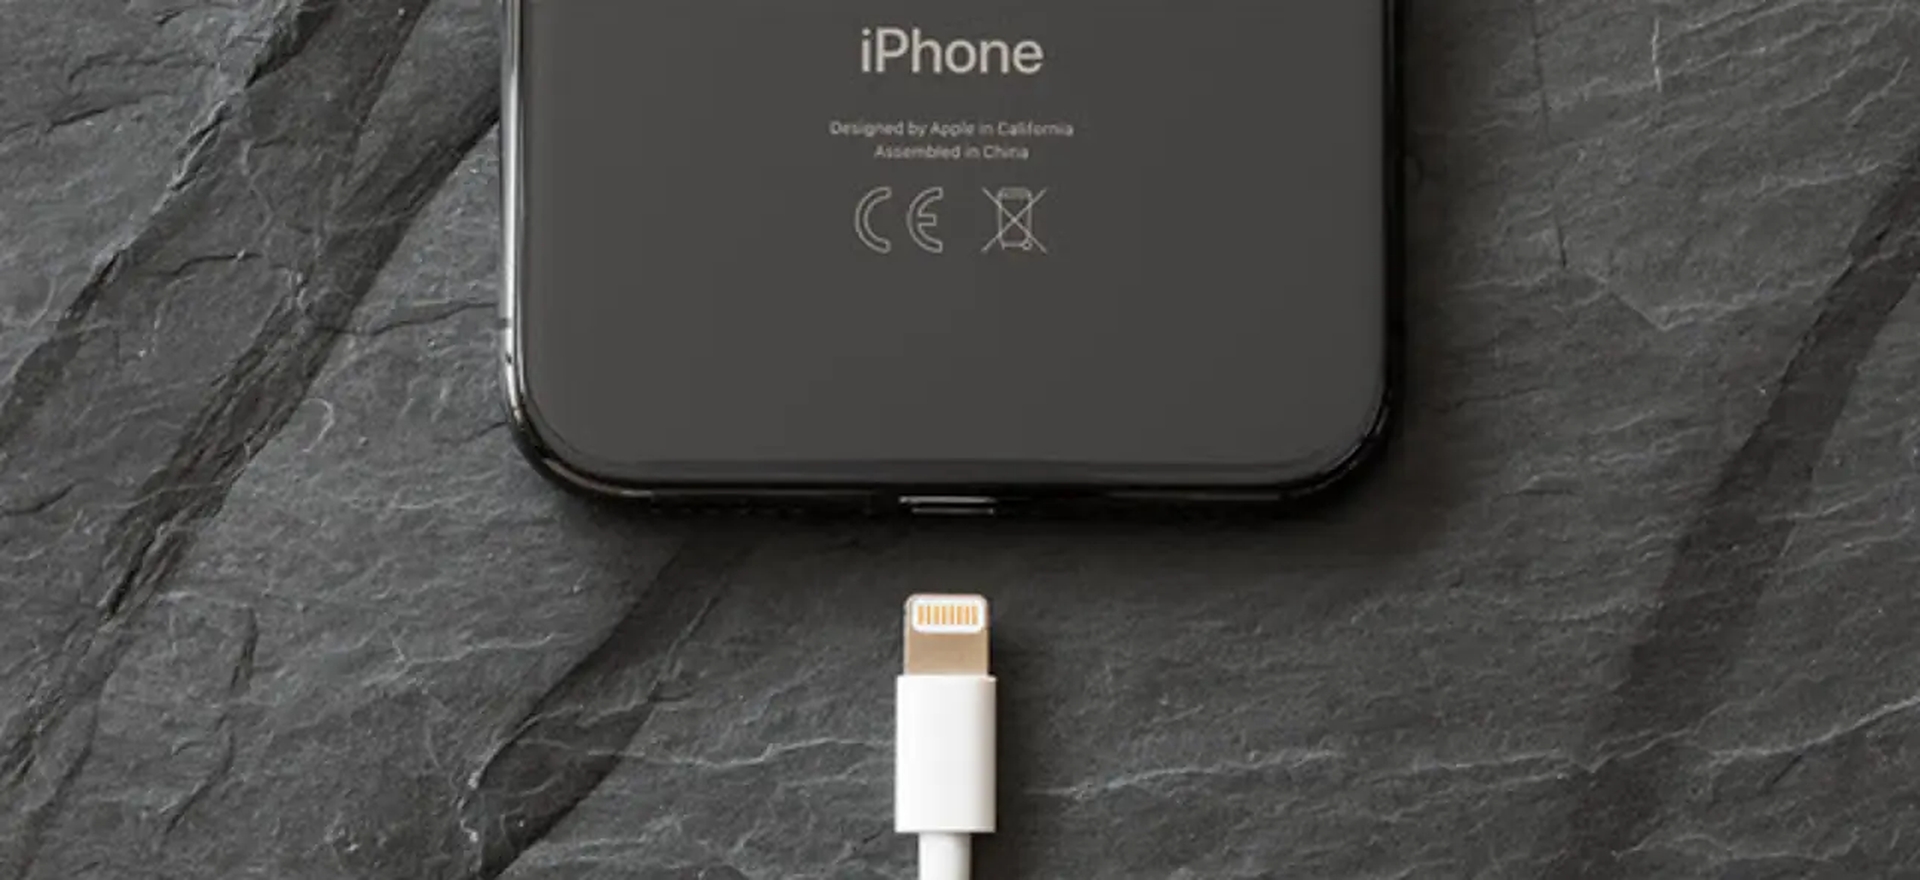 In this guide, we are going to go over what is Optimized Battery Charging iPhone, and how to turn on Optimized Battery Charging or switch it off.